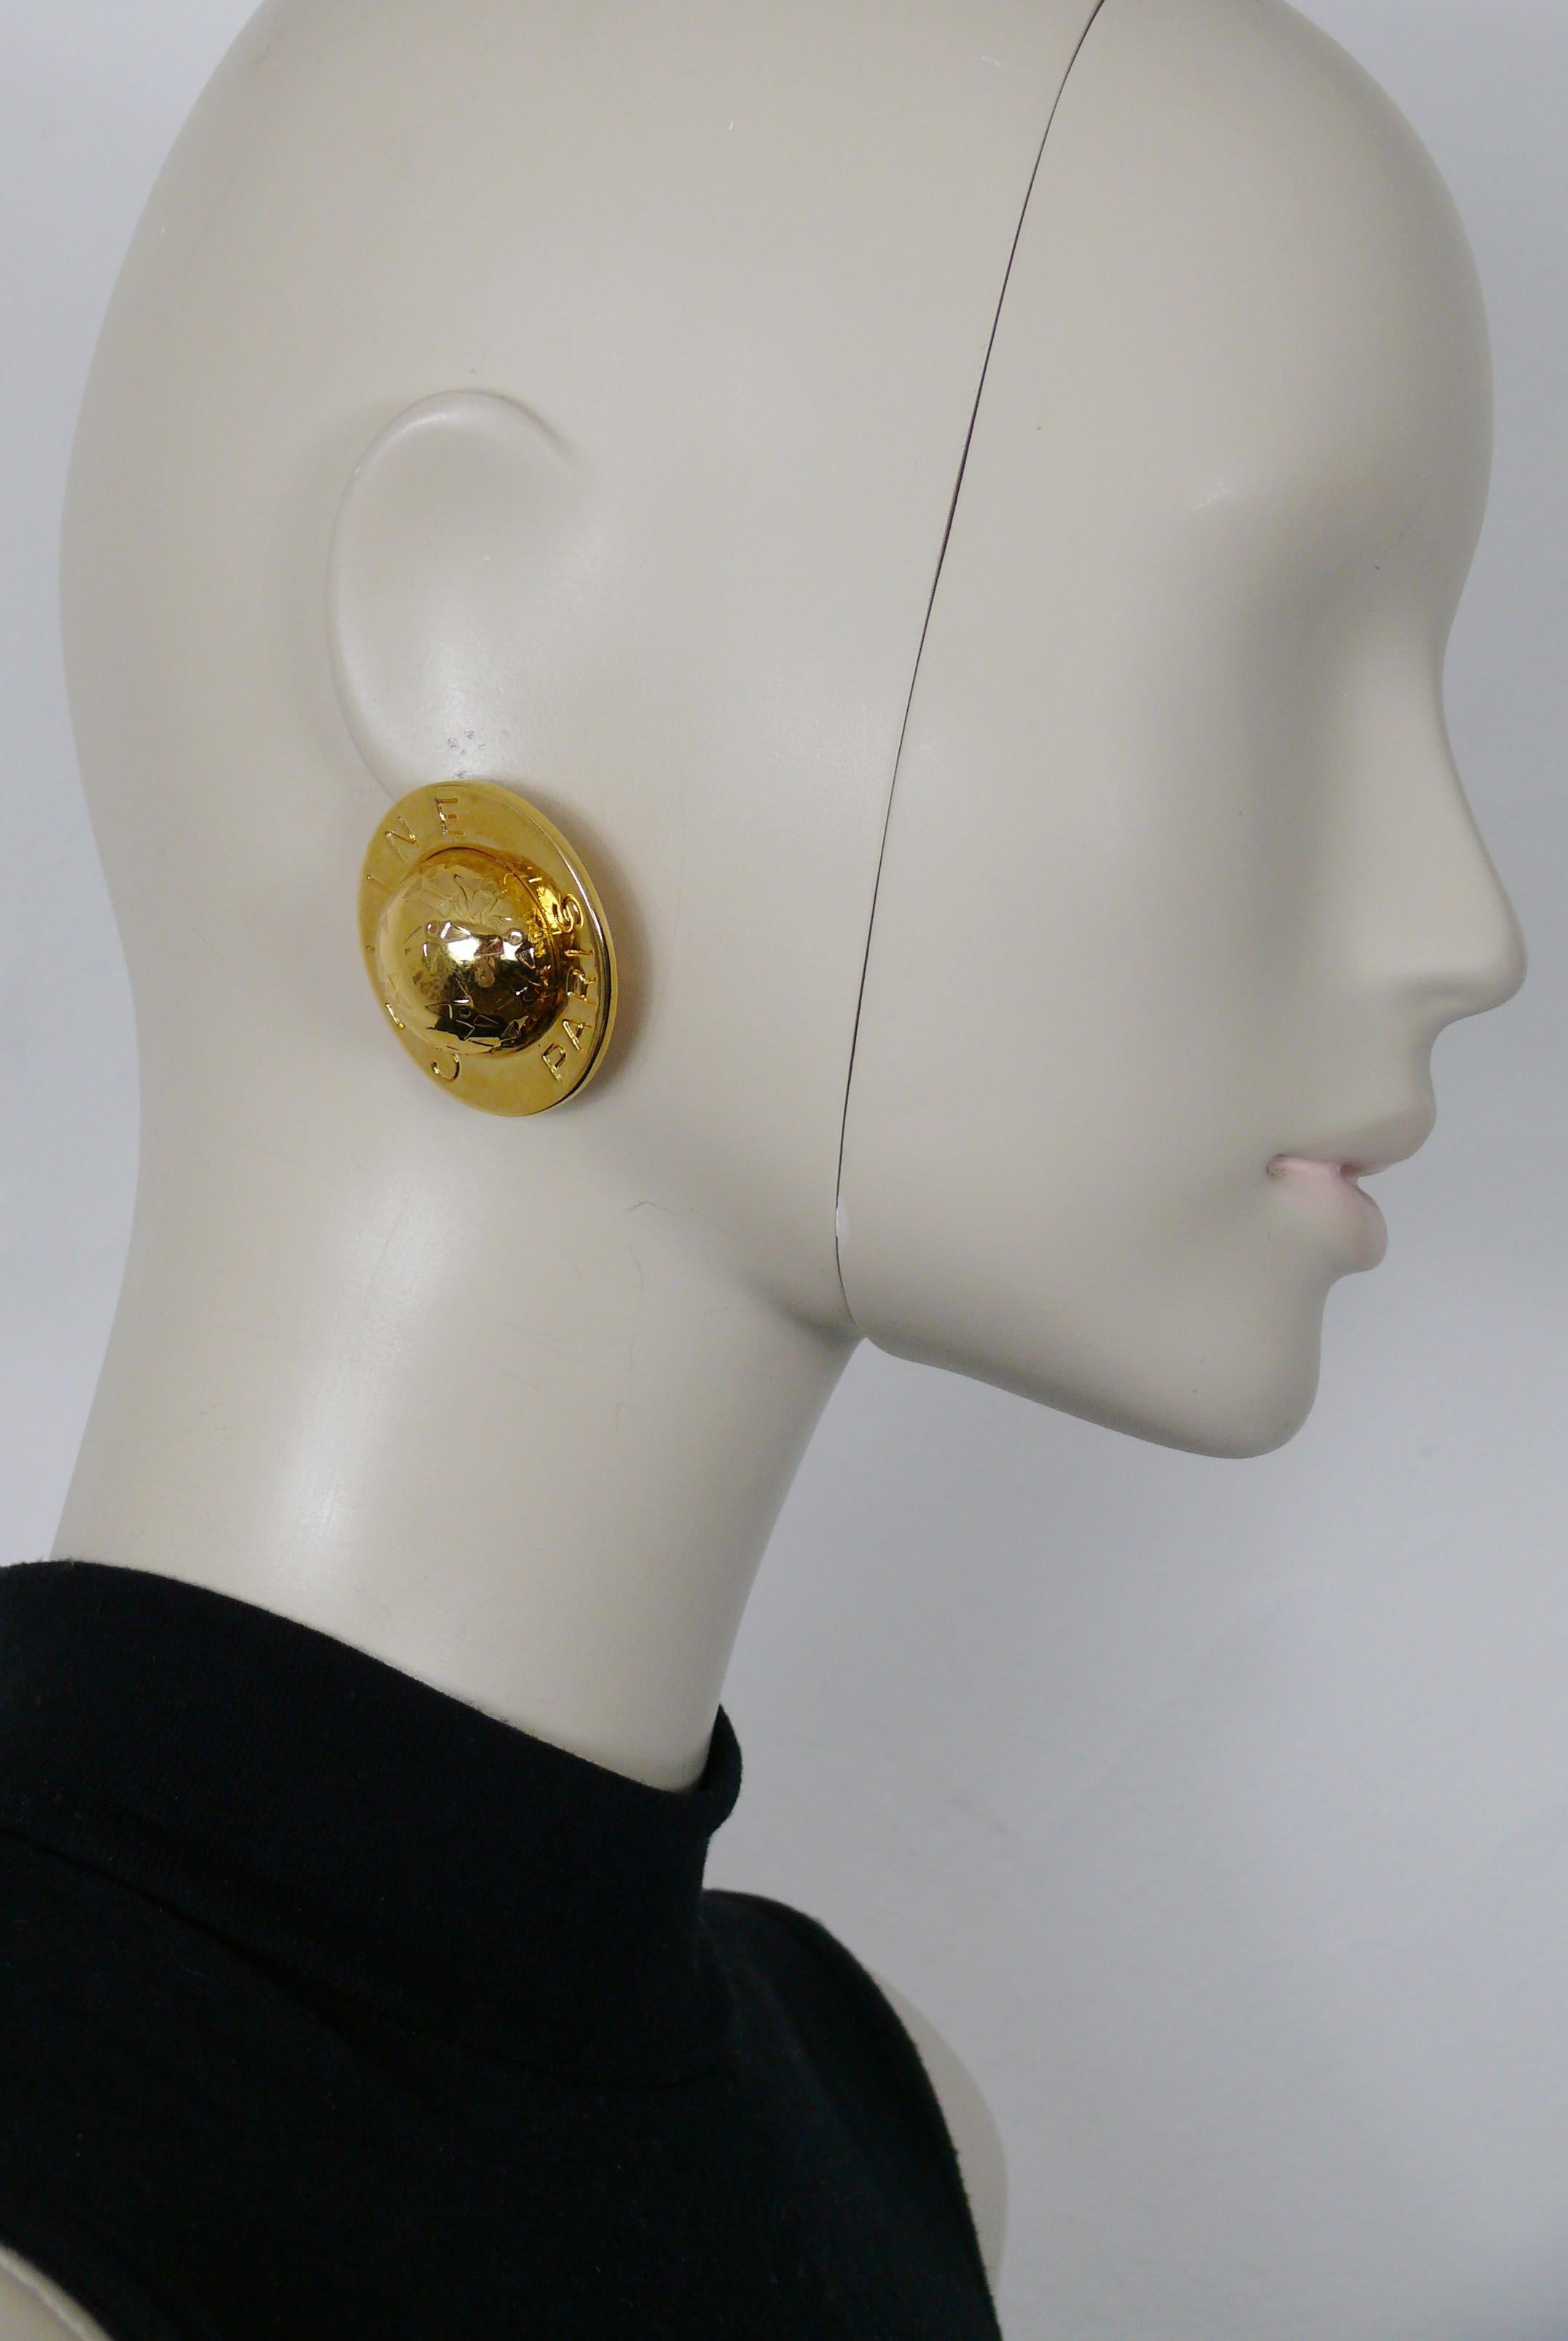 CELINE Paris vintage massive gold toned clip-on earrings featuring an iconic celestial design and embossed CELINE PARIS.

Embossed CELINE LF MADE IN ITALY.

Indicative measurements : diameter approx. 4.1 cm (1.61 inches).

Weight per earring :